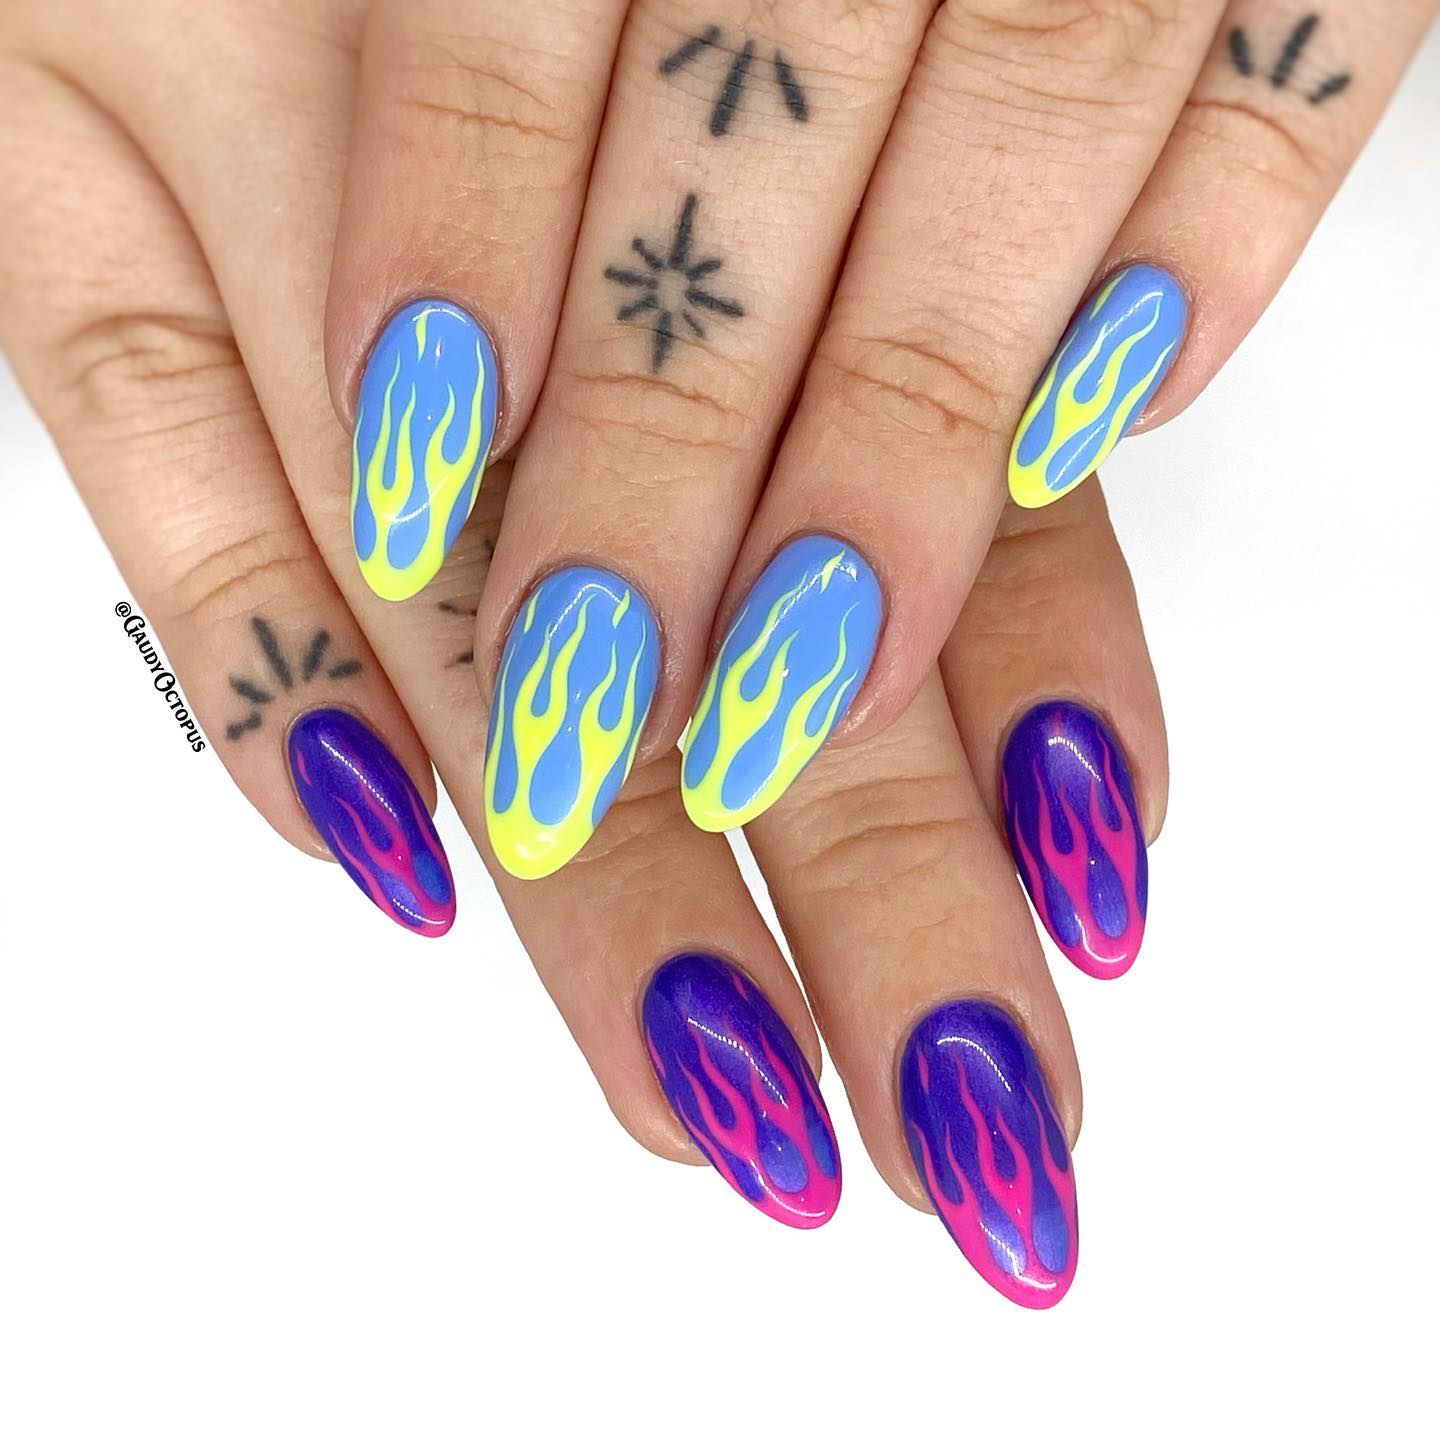 Have you ever seen more colorful flame nails than the ones above? If you like to apply different nail polishes, this nail art idea is for you. On a baby blue base, yellow flames are used while pink ones are used on a dark blue base. You will be on fire with them!